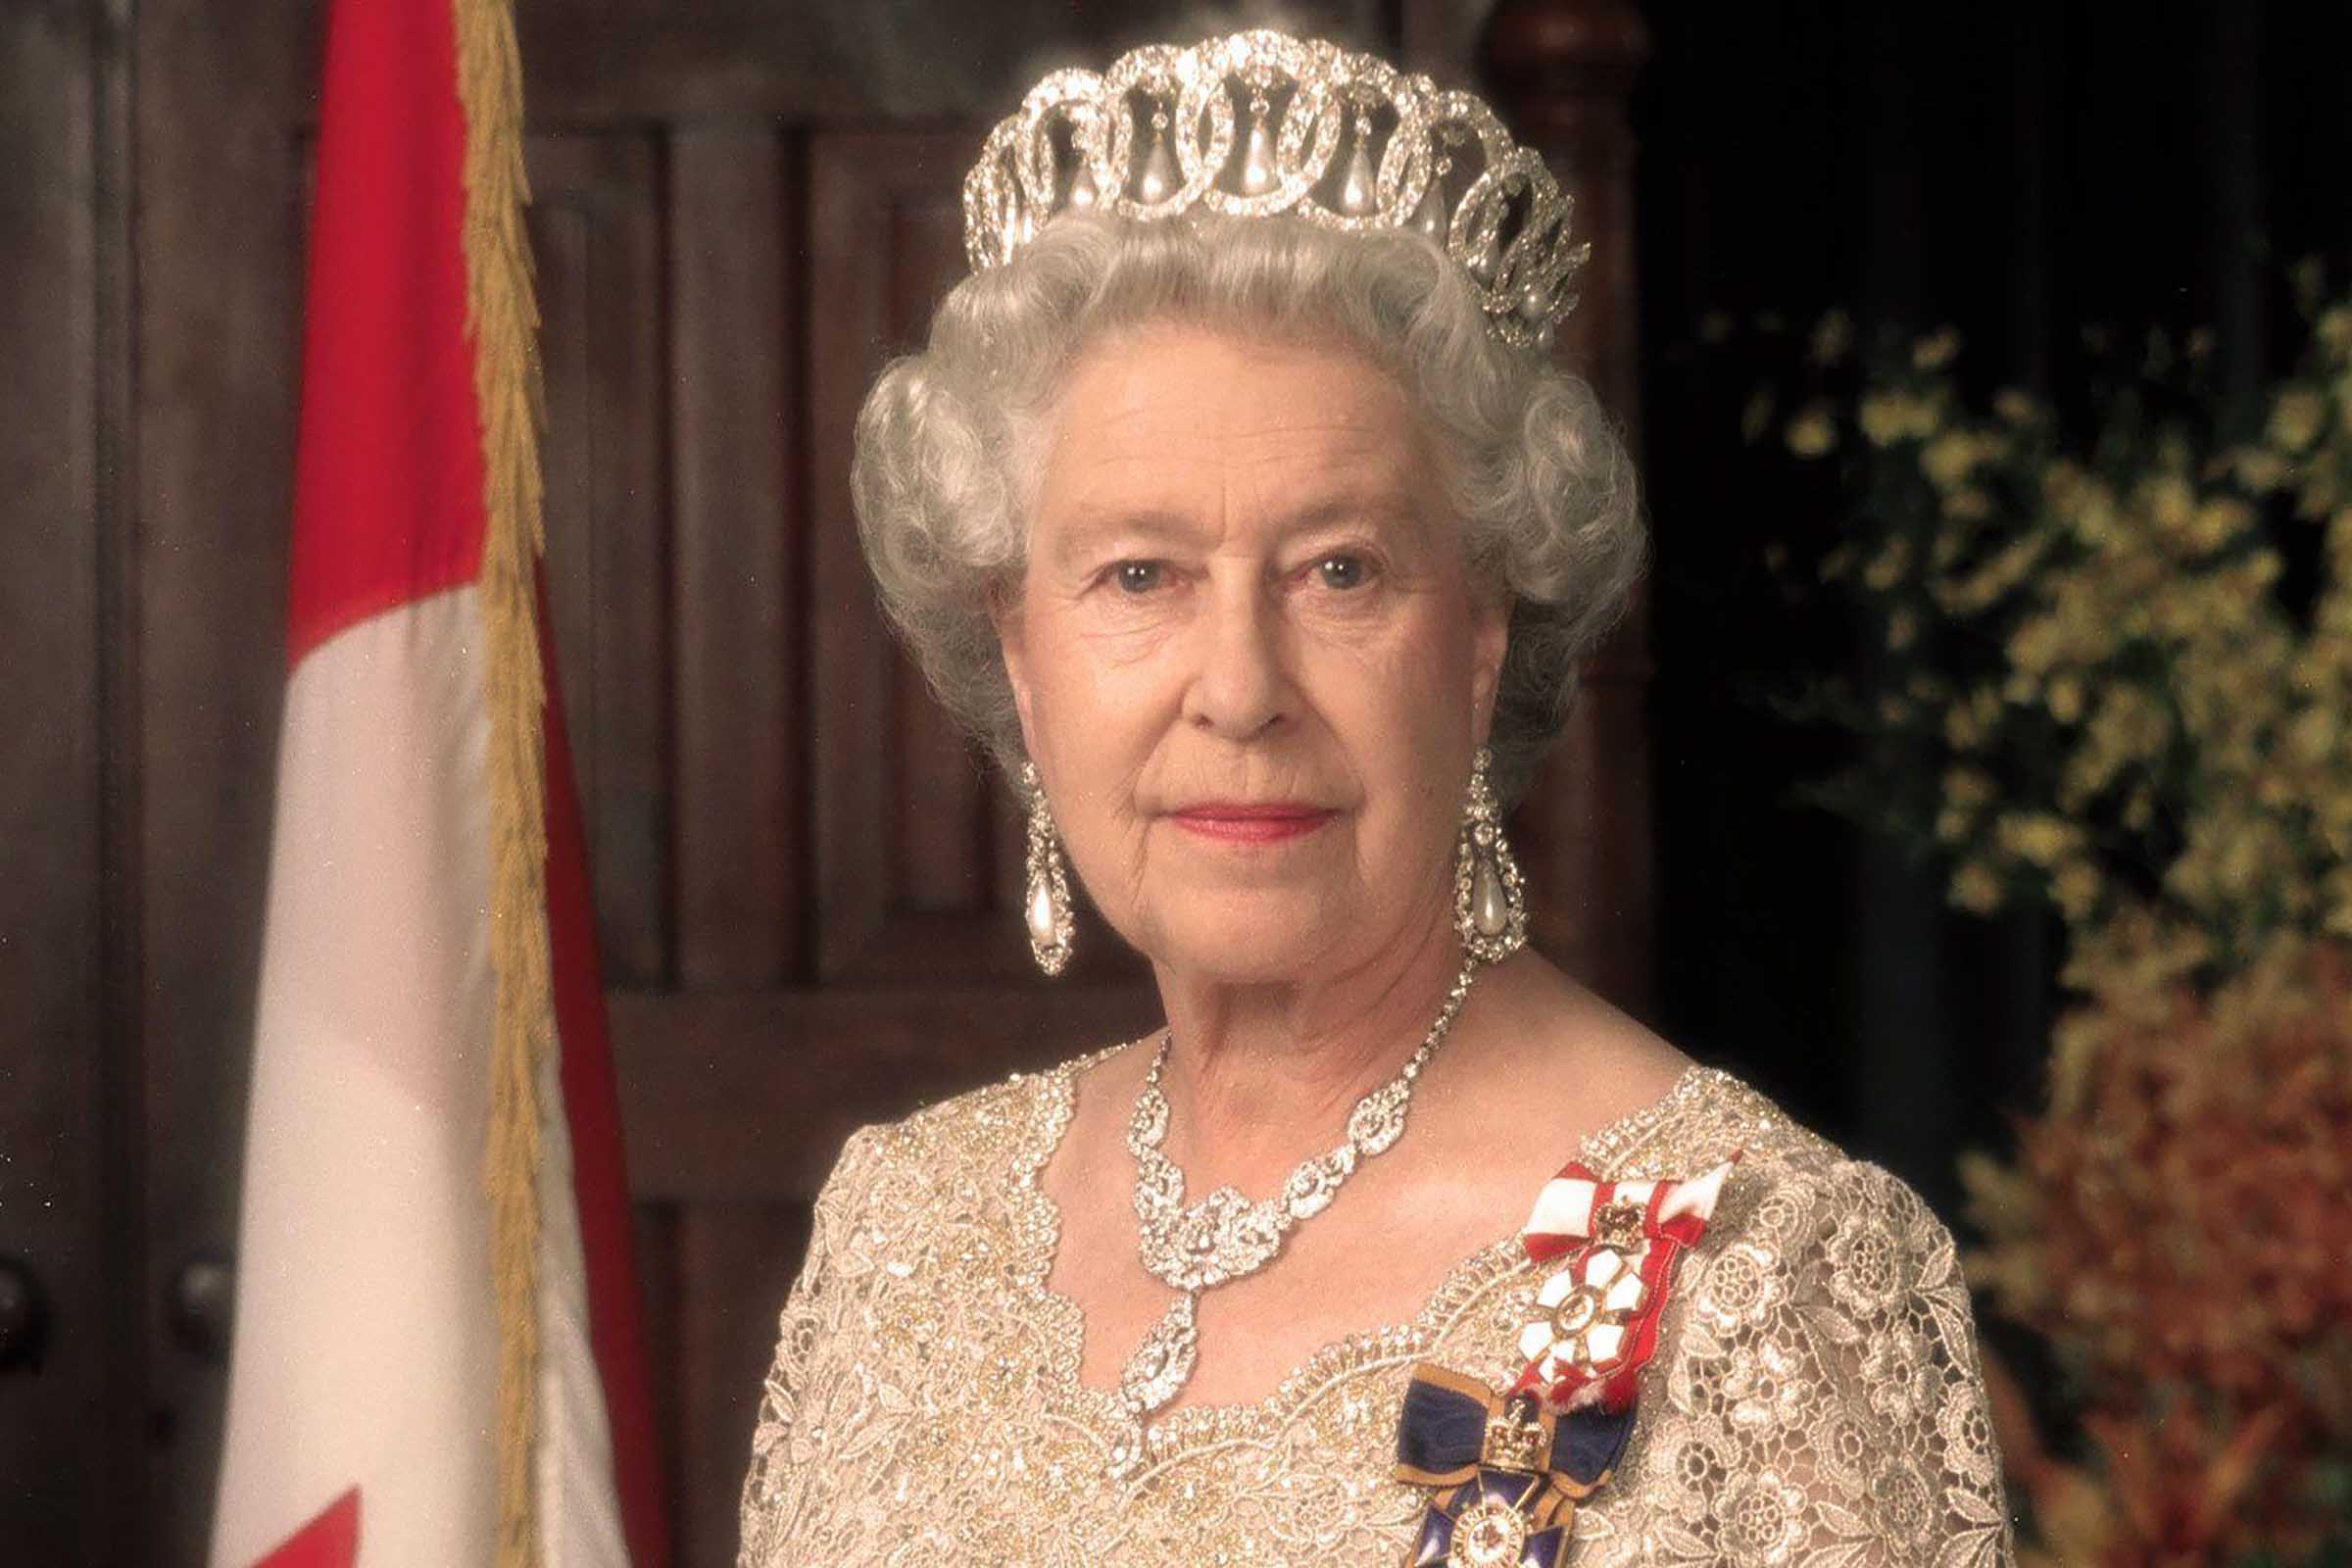 Where To Pay Condolences To The Queen In Miami